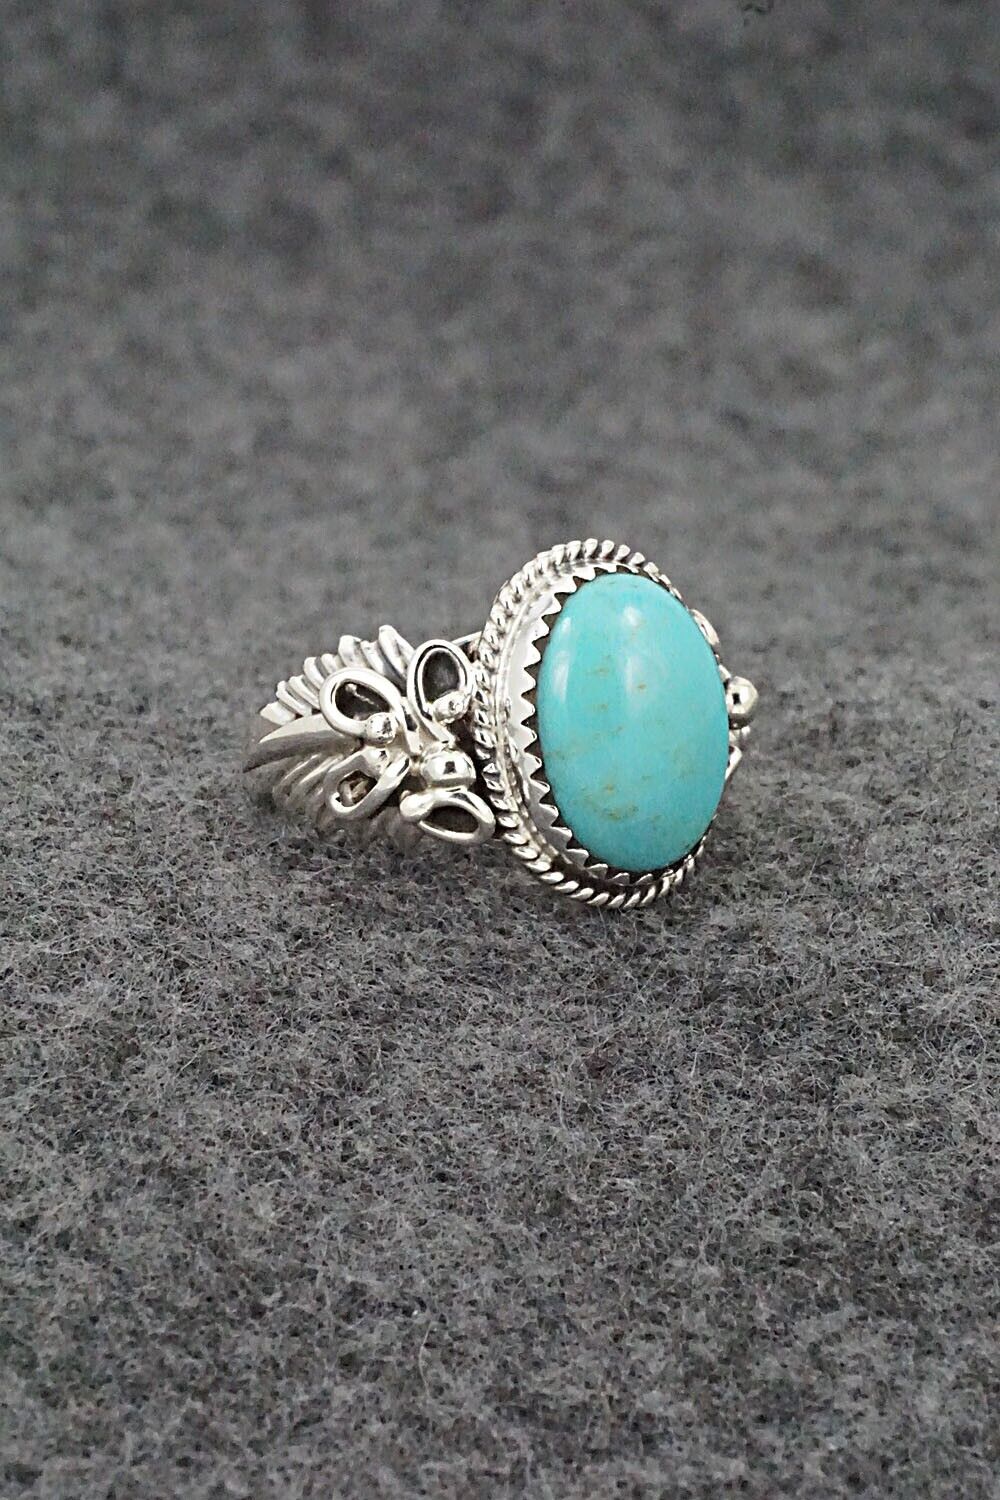 Turquoise & Sterling Silver Ring - Jeannette Saunders - Size 6